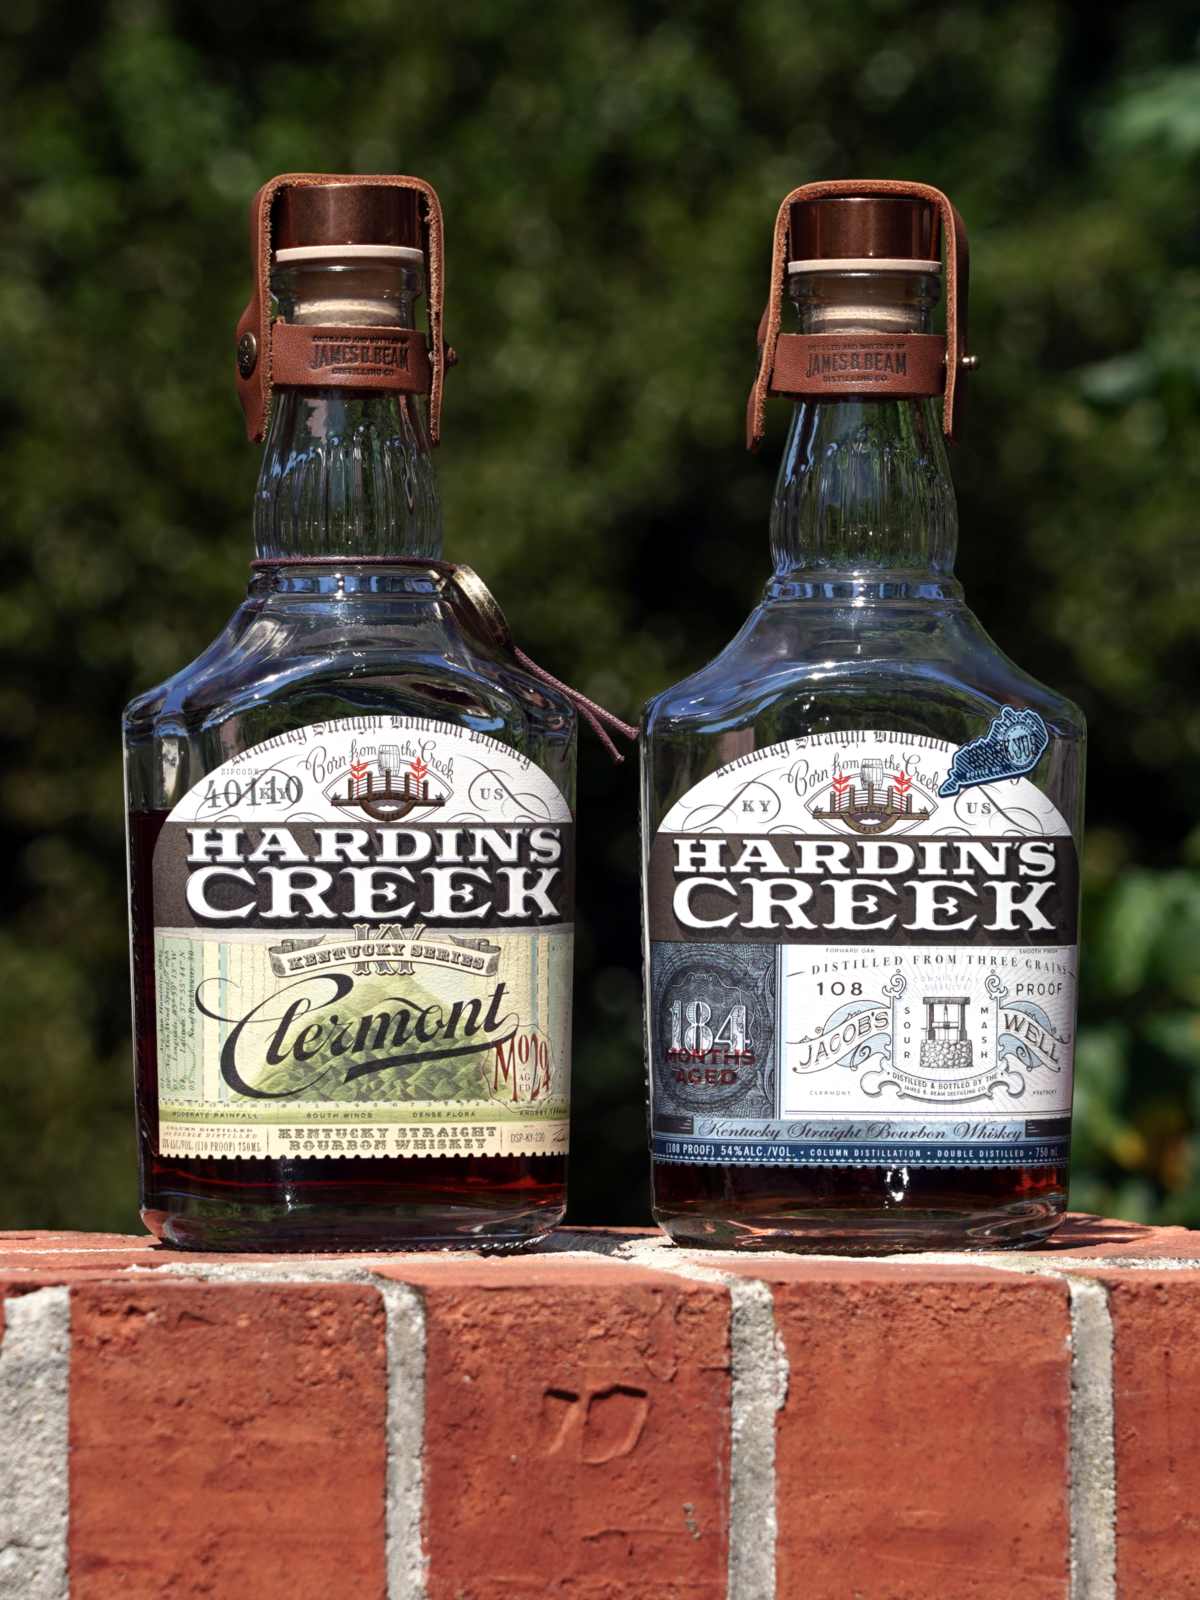 hardin’s creed jacob’s well vs clermont comparison featured